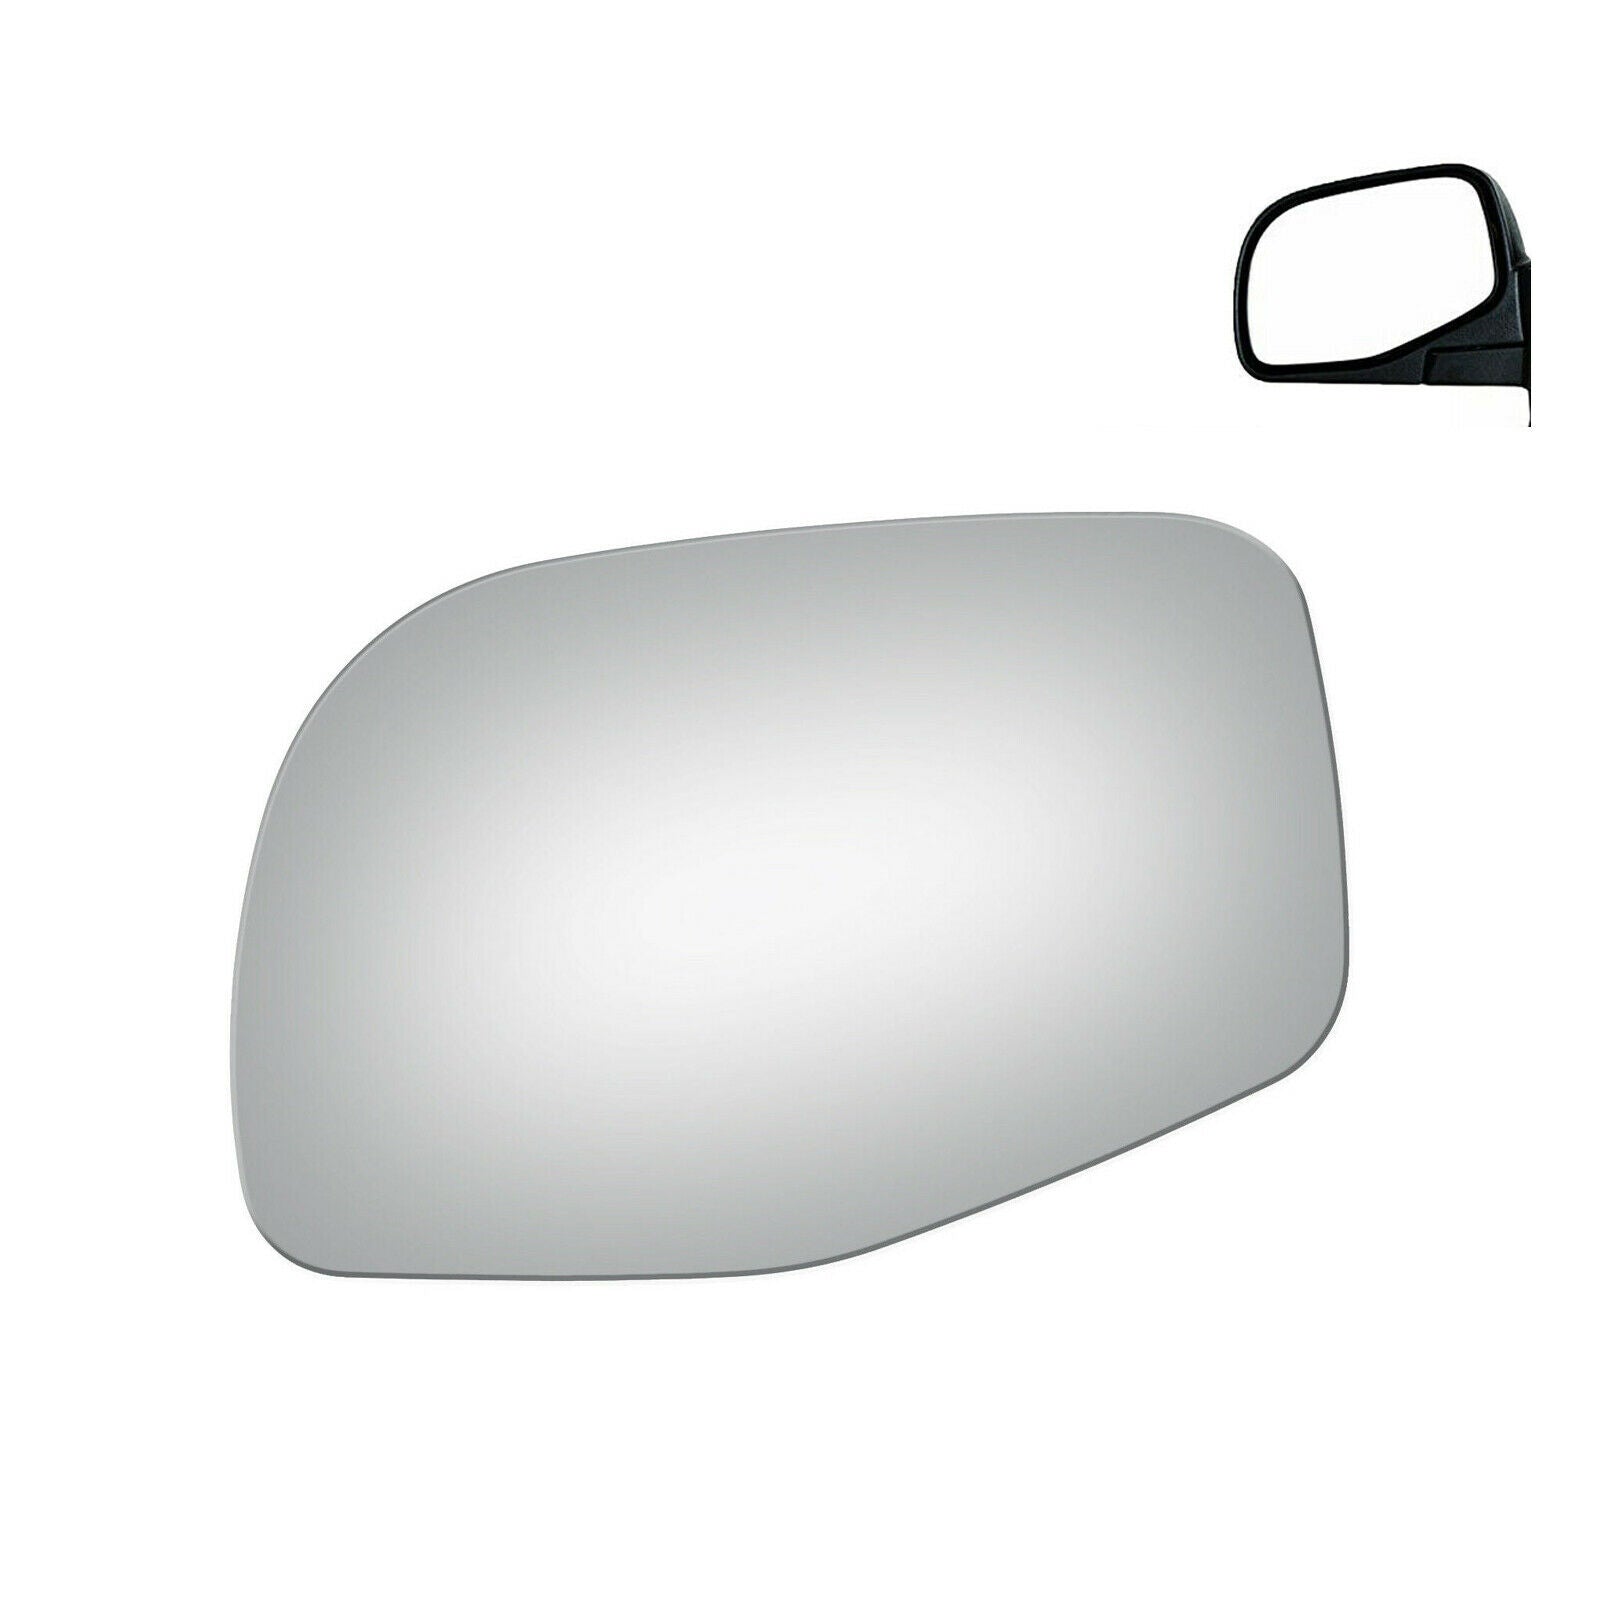 WLLW Mirror Glass Replacement for Ford Explorer Ranger/ Mercury Mountaineer/ Mazda 3 B2300 B2500 B3000 B4000, Driver Left LH/Passenger Right RH/The Both Sides Flat Convex M-0058